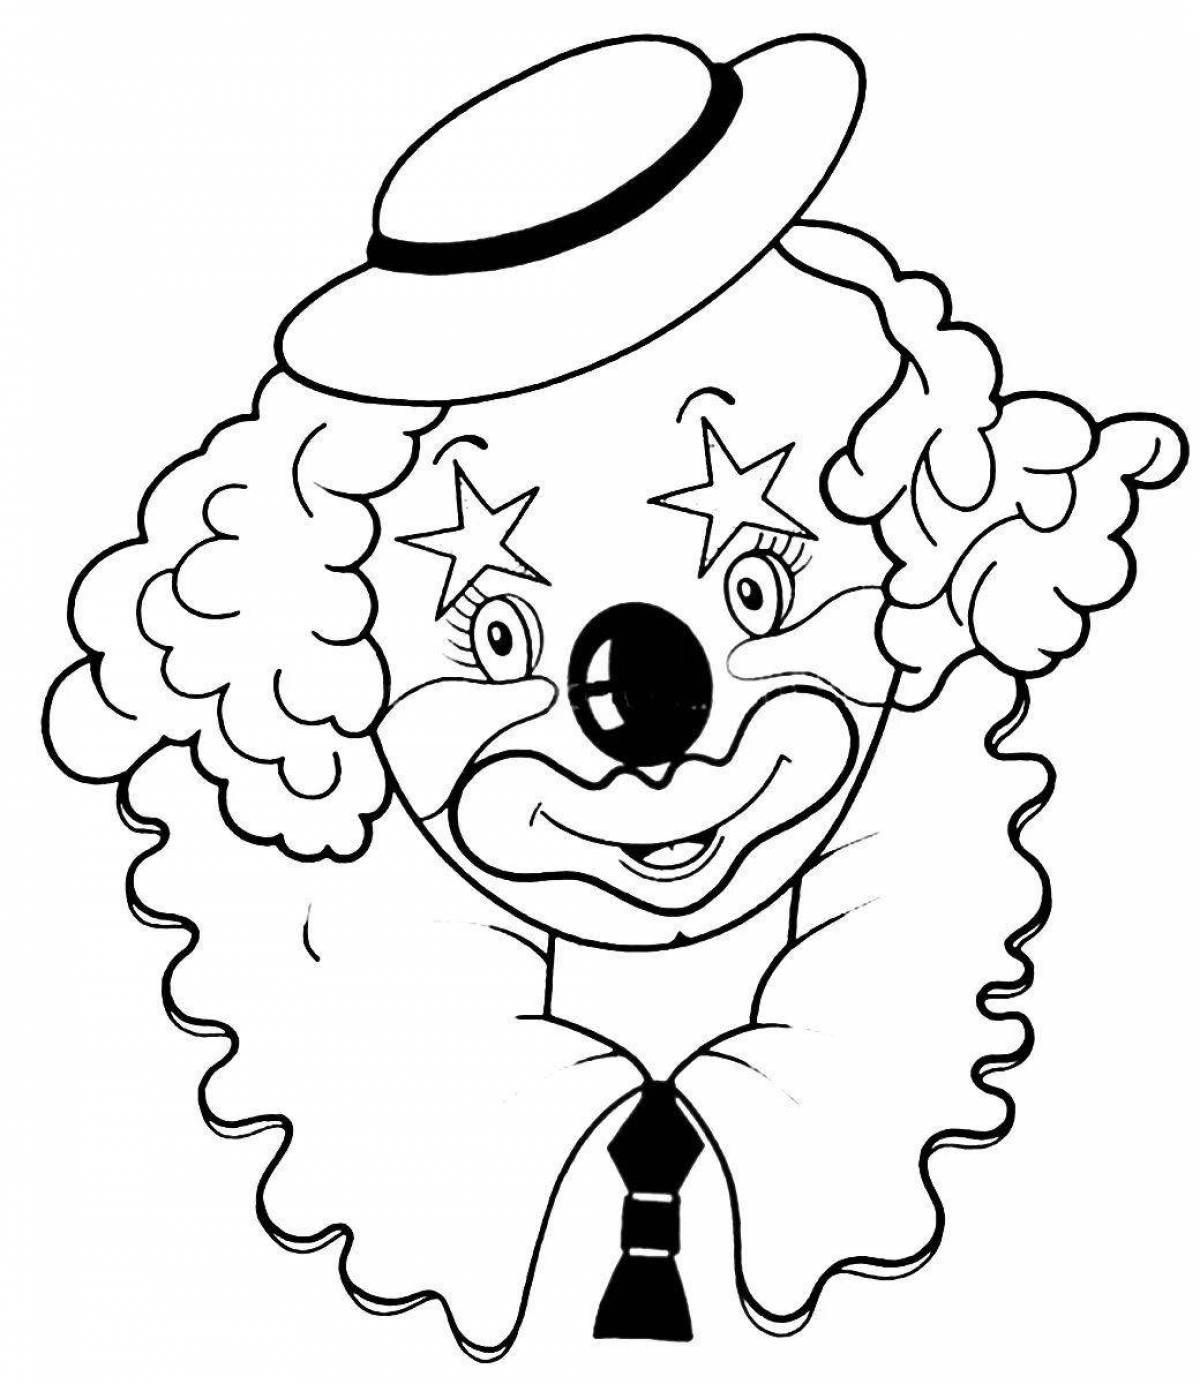 Amazing clown face coloring page for kids